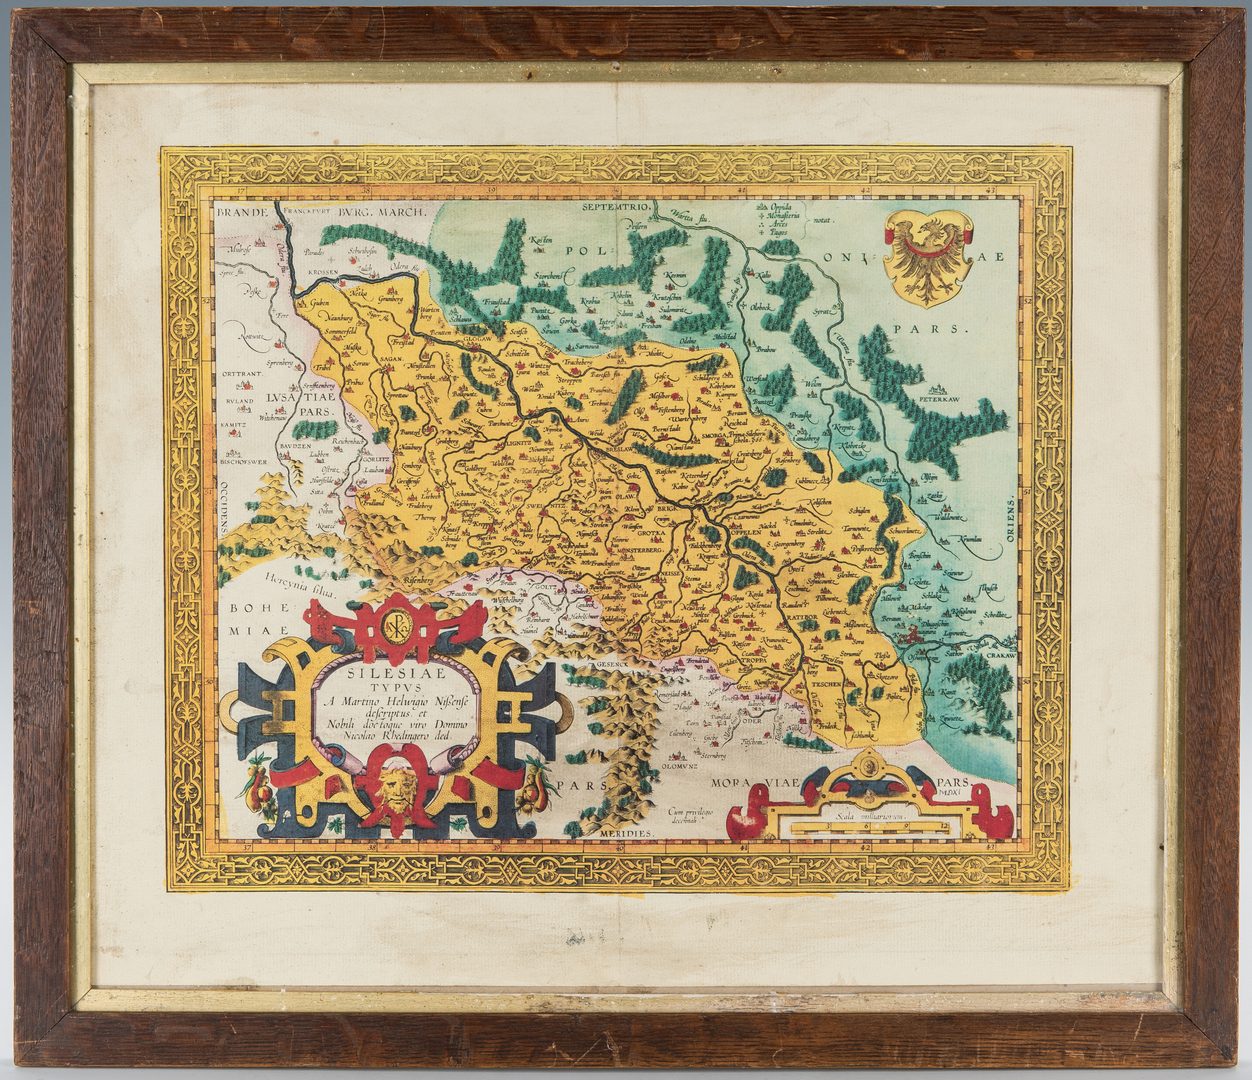 Lot 170: 3 Maps, incl. Helwig, Ortelius, Munster, and Vaugondy